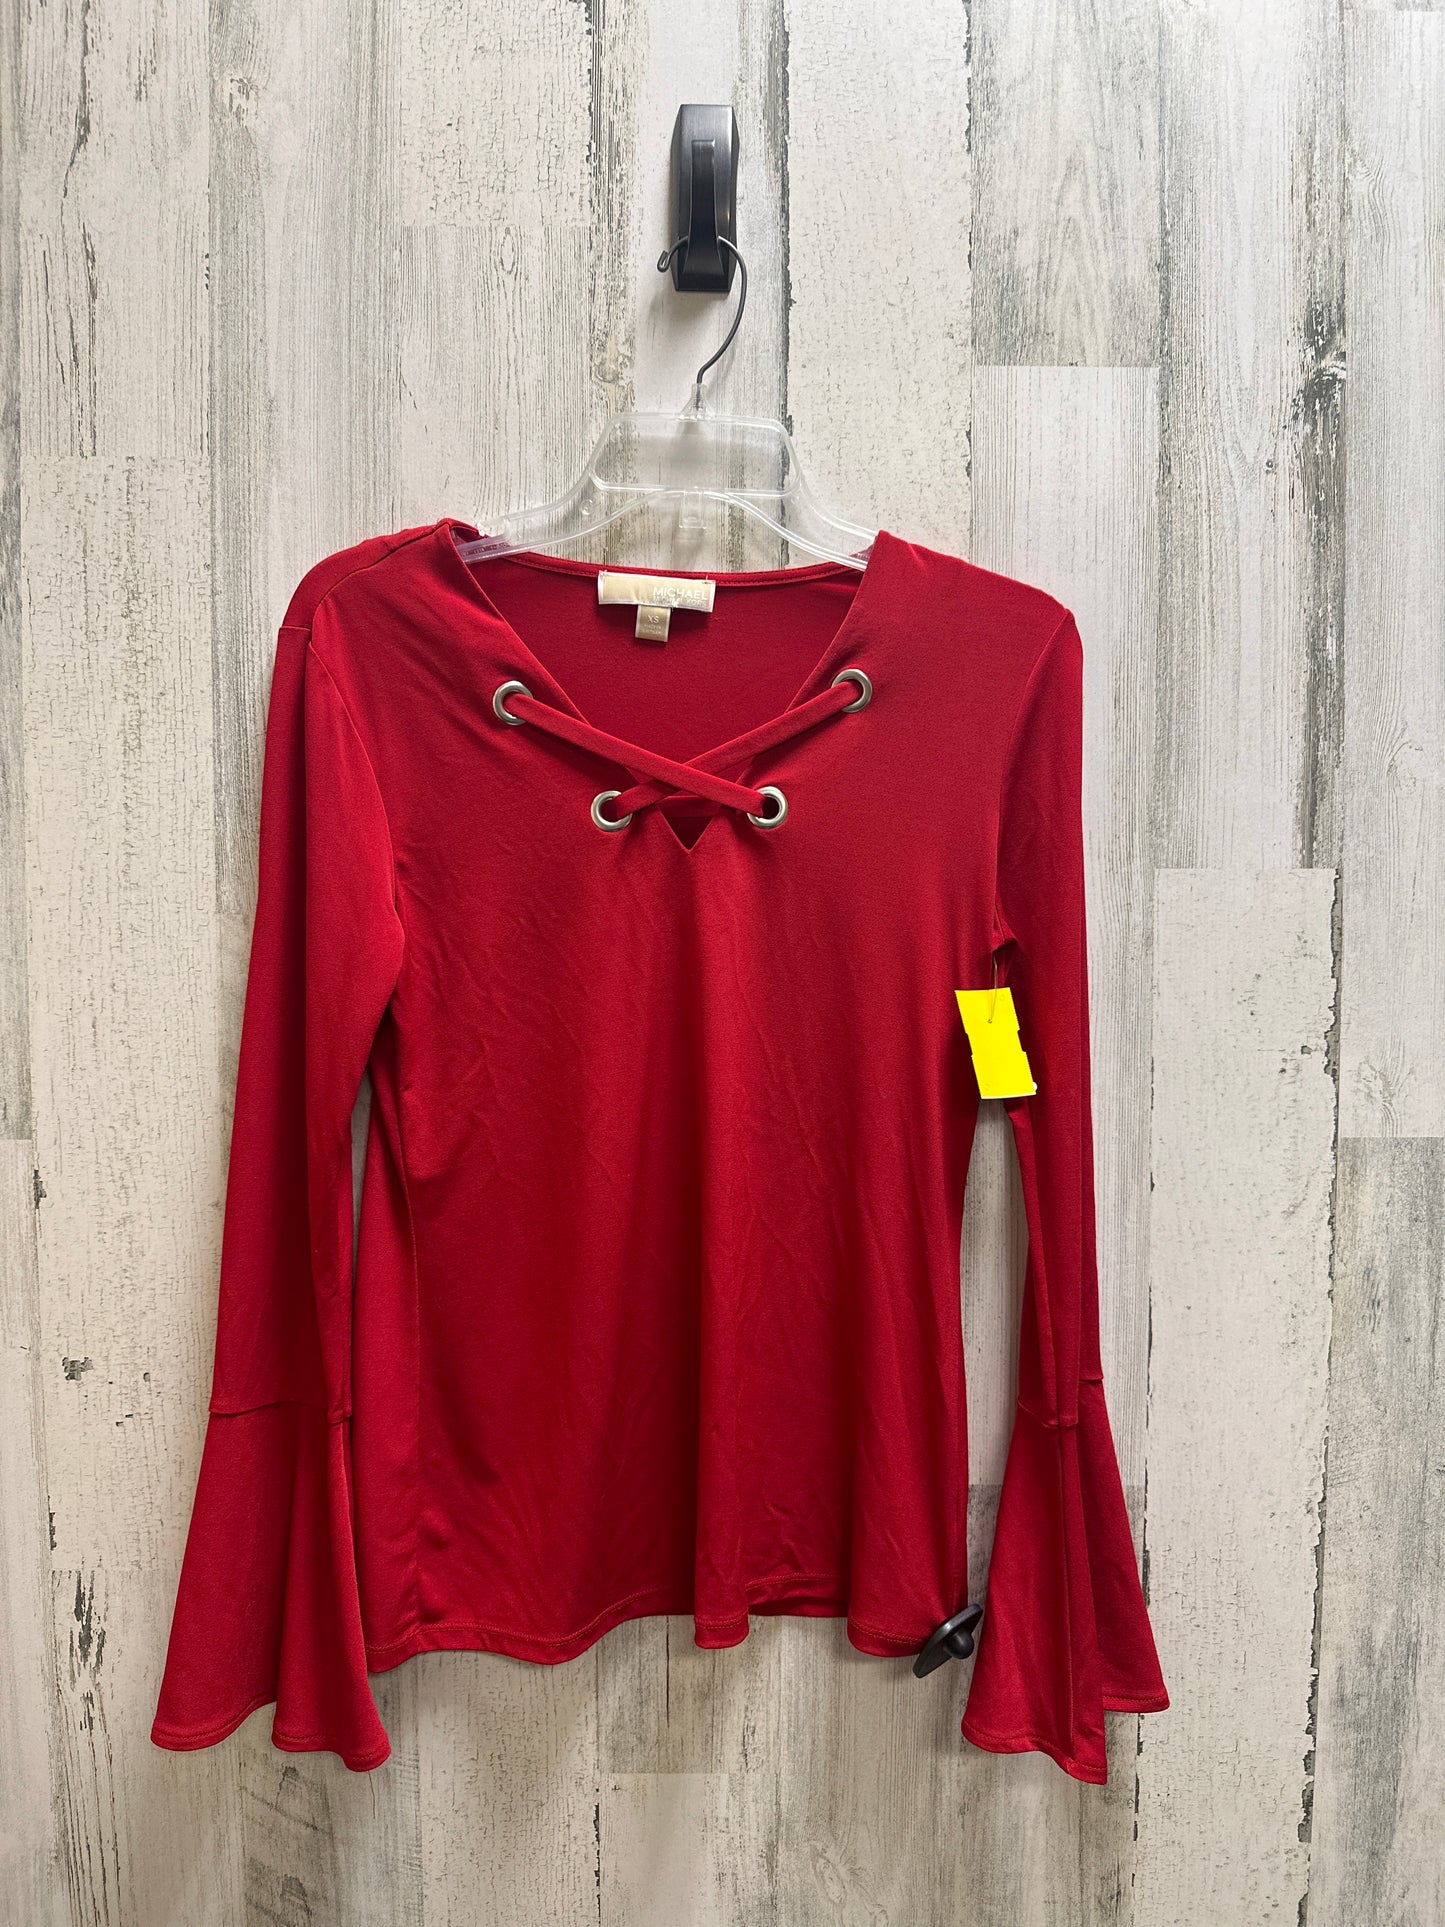 Top Long Sleeve By Michael Kors  Size: Xs